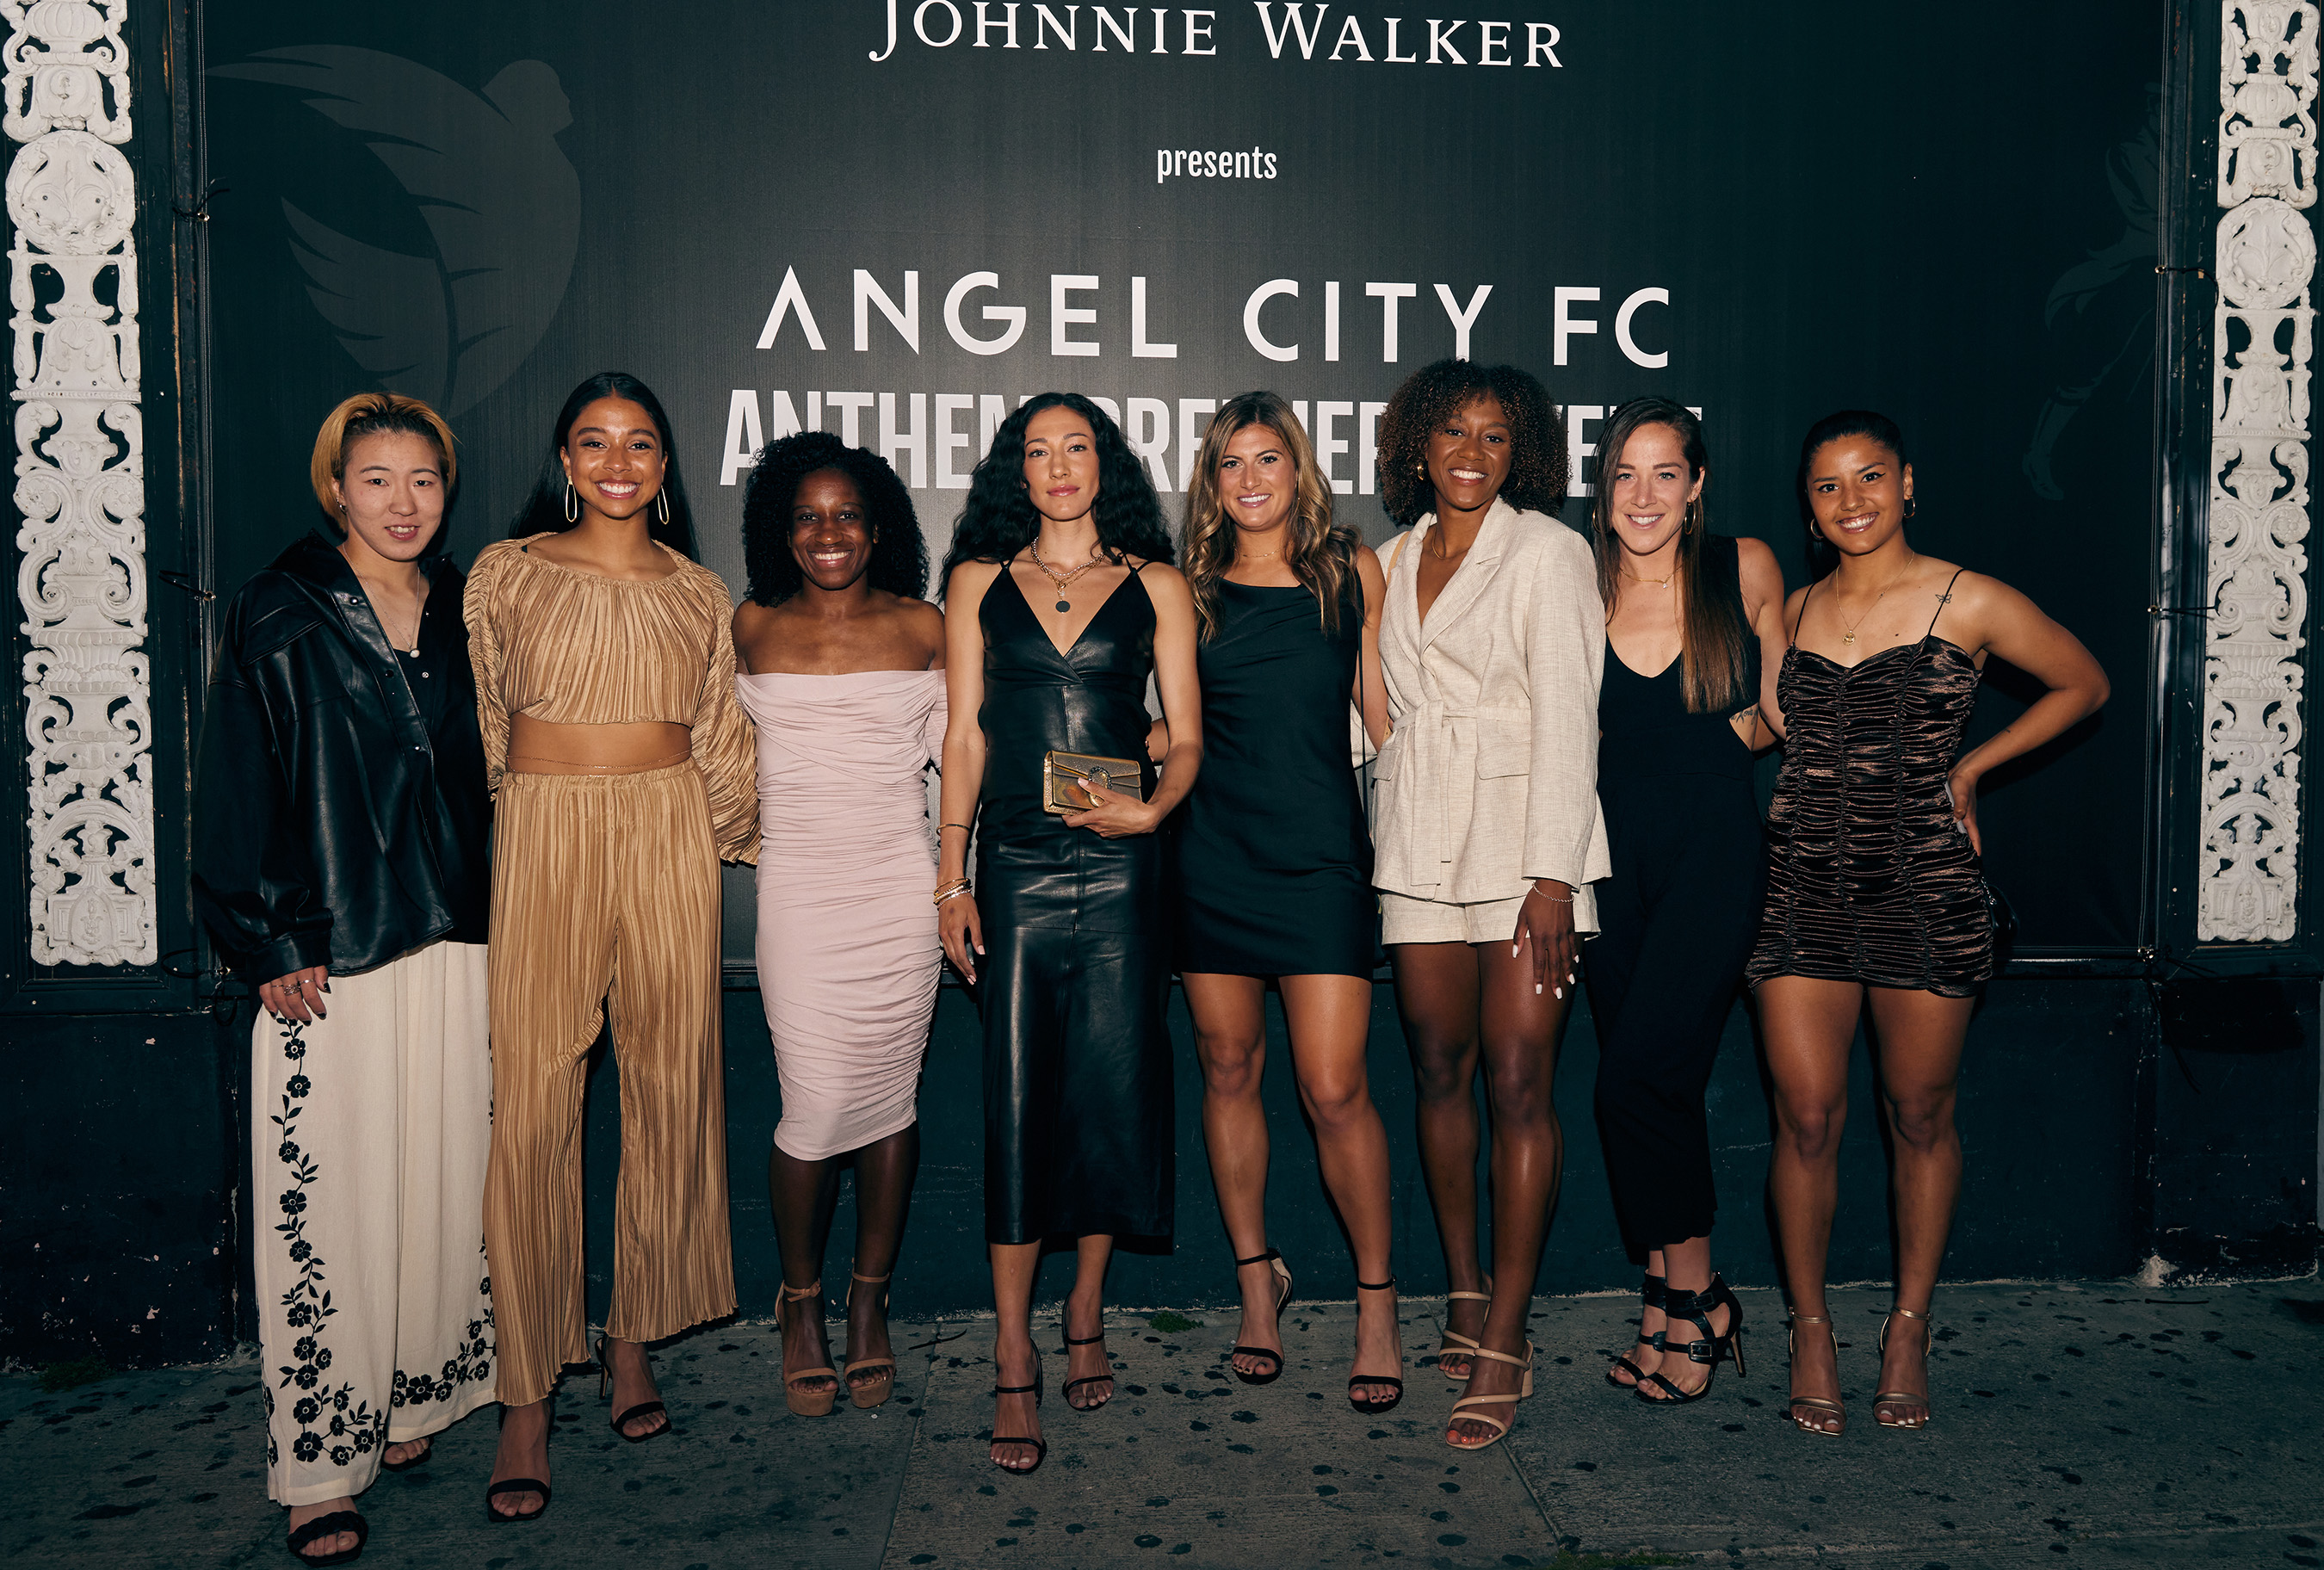 Members of the Angel City FC Team Celebrate Johnnie Walker’s New First Strides Initiative at Their Anthem Launch Event